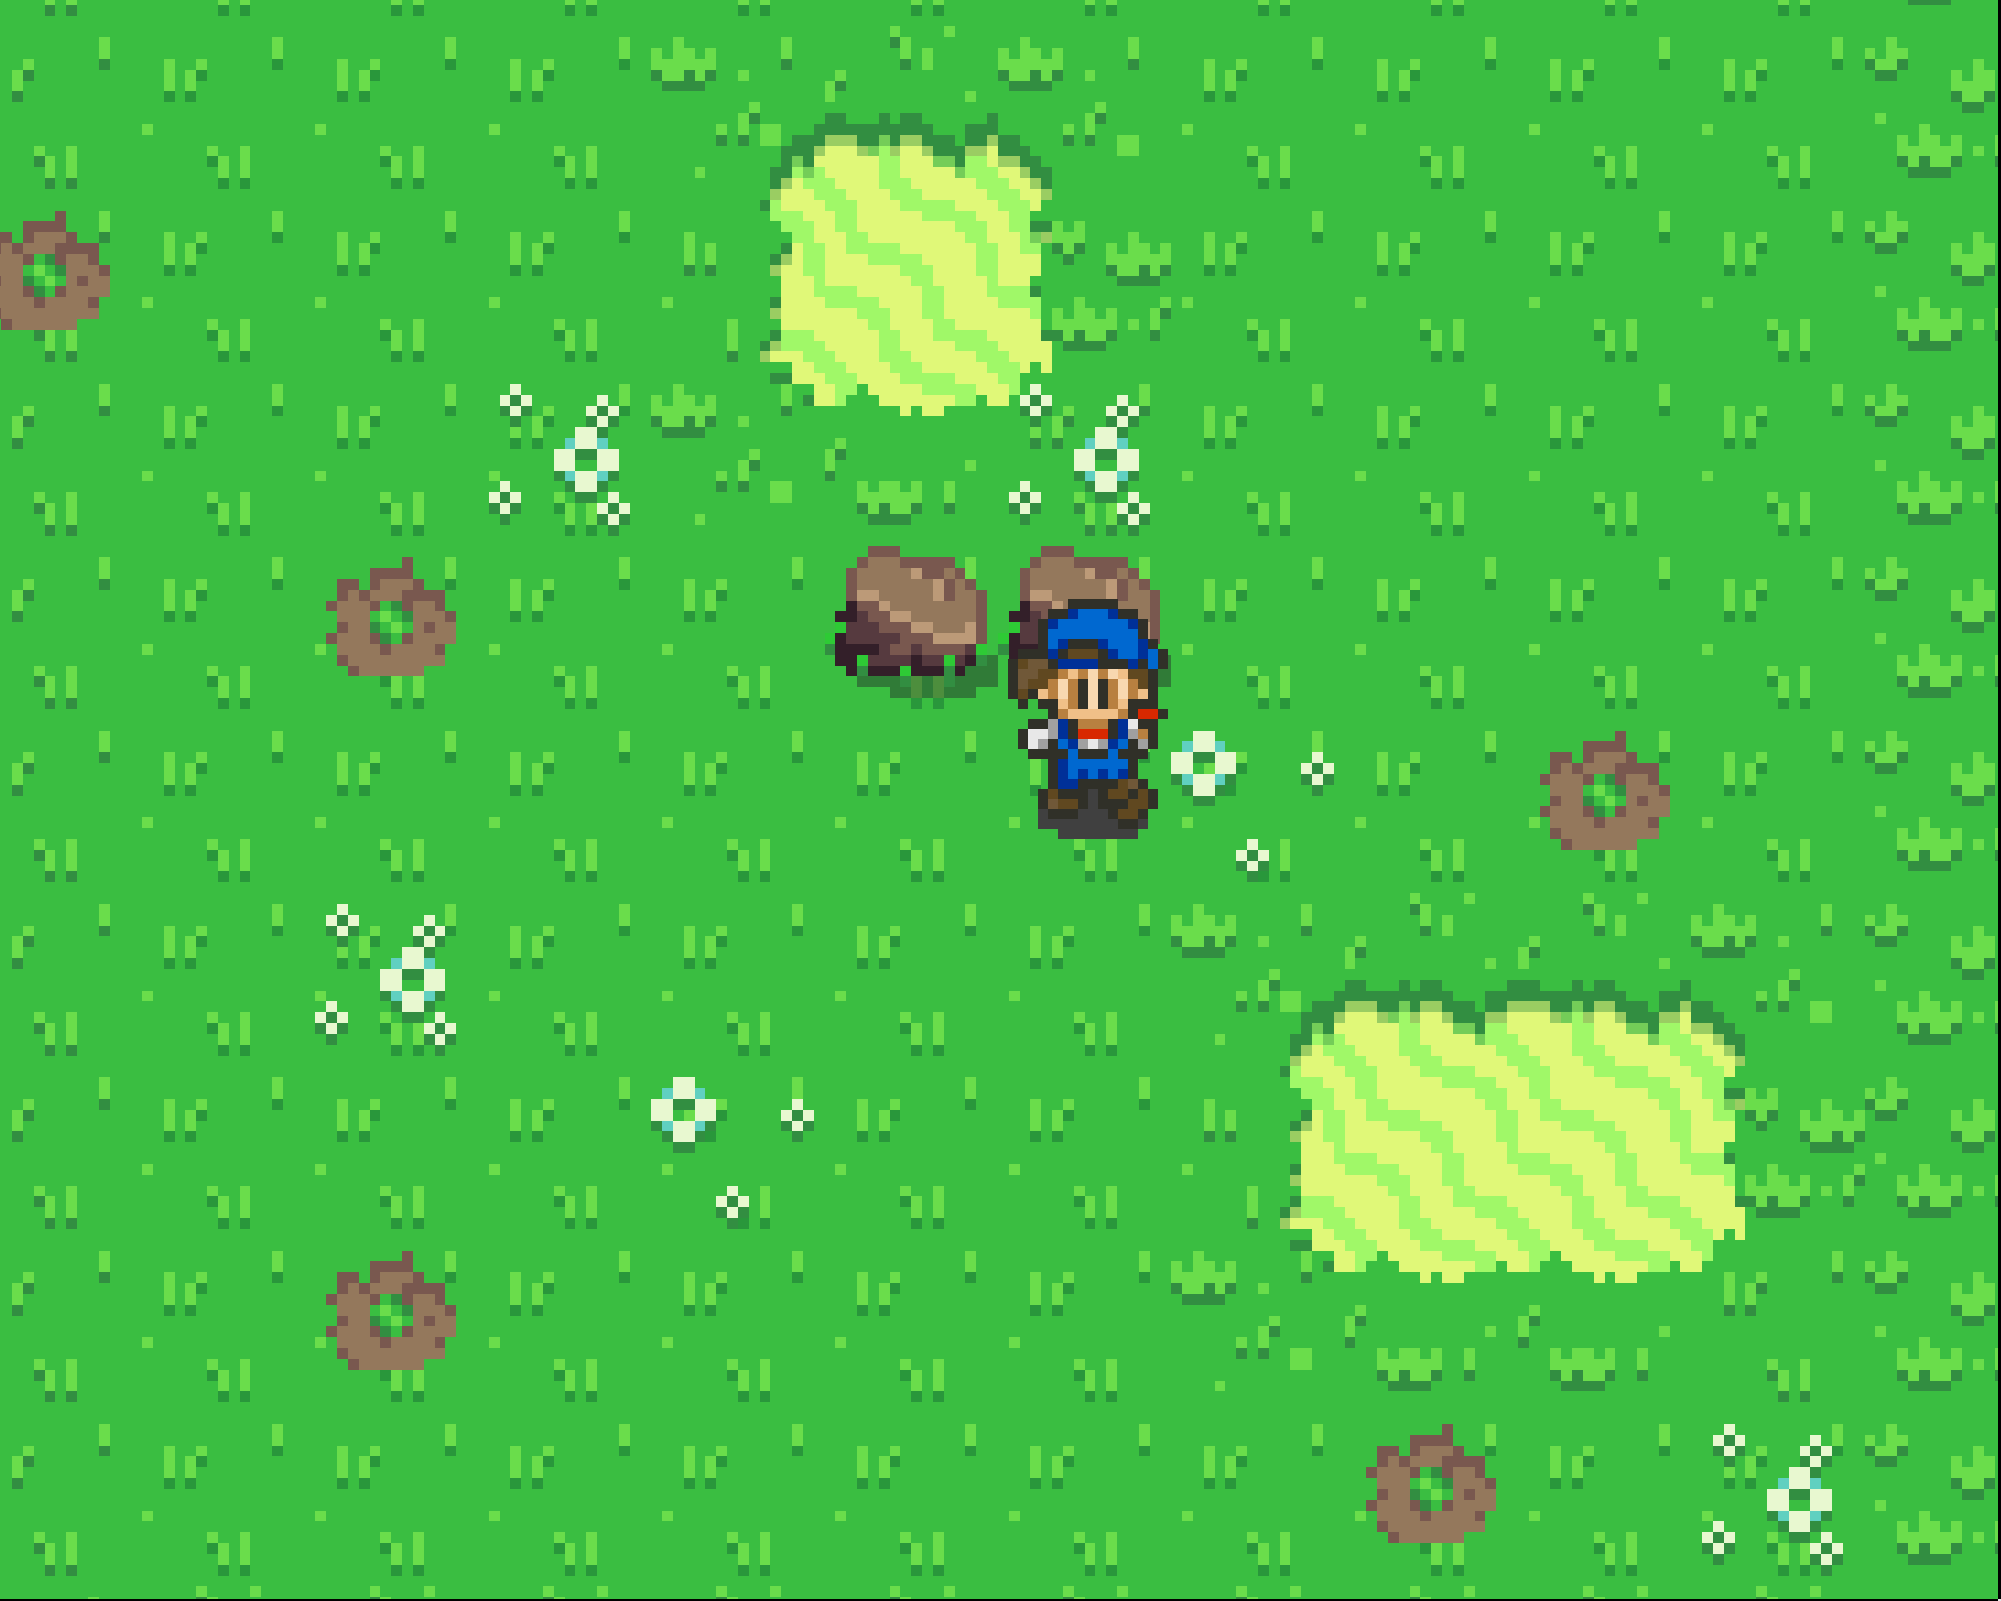 In this series of blog posts I plan to flesh out a harvest moon game from scratch - using just simple HTML, CSS and some JavaScript. Will not be using any frameworks :)